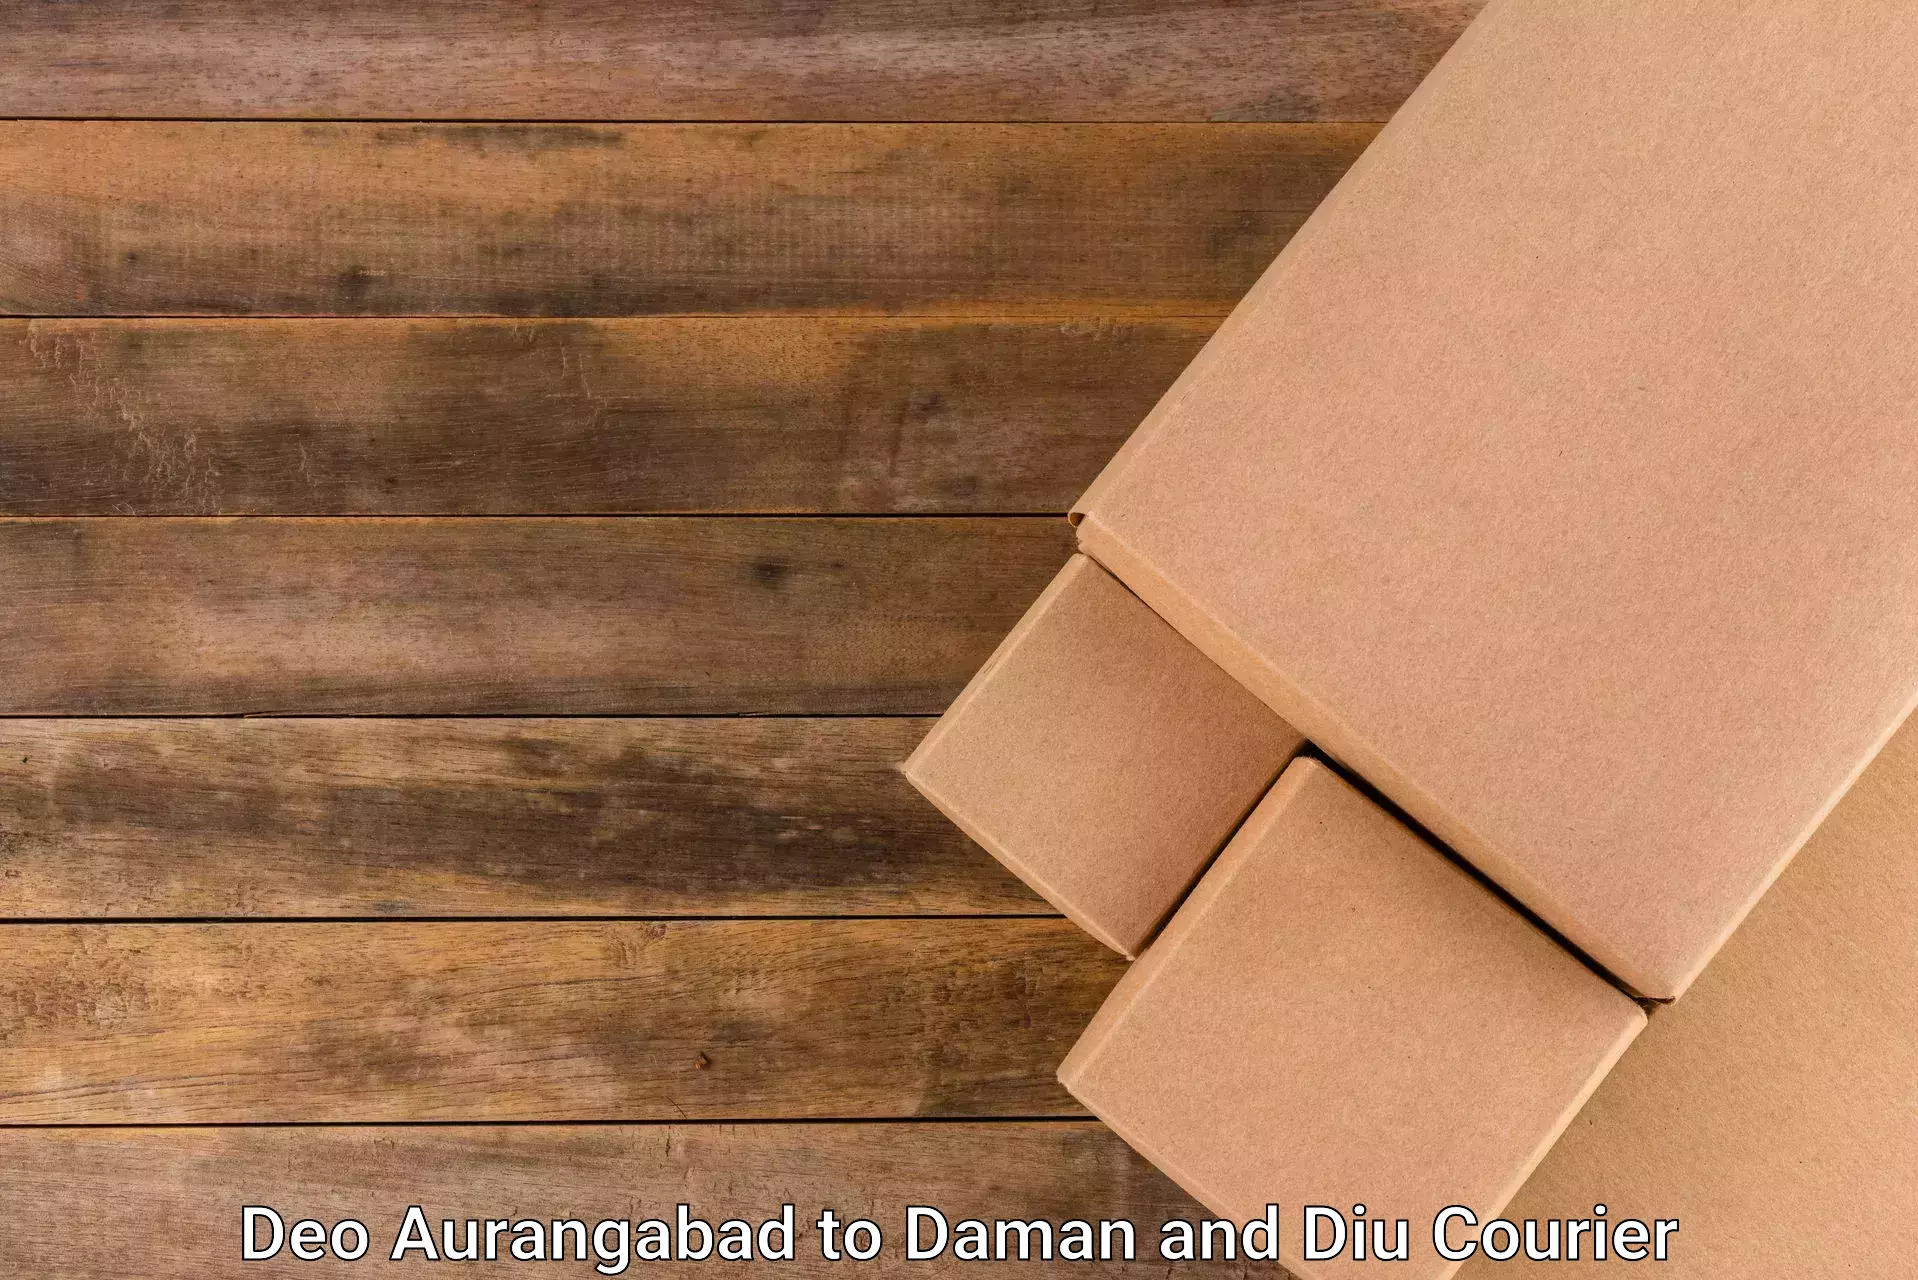 24-hour delivery options Deo Aurangabad to Daman and Diu